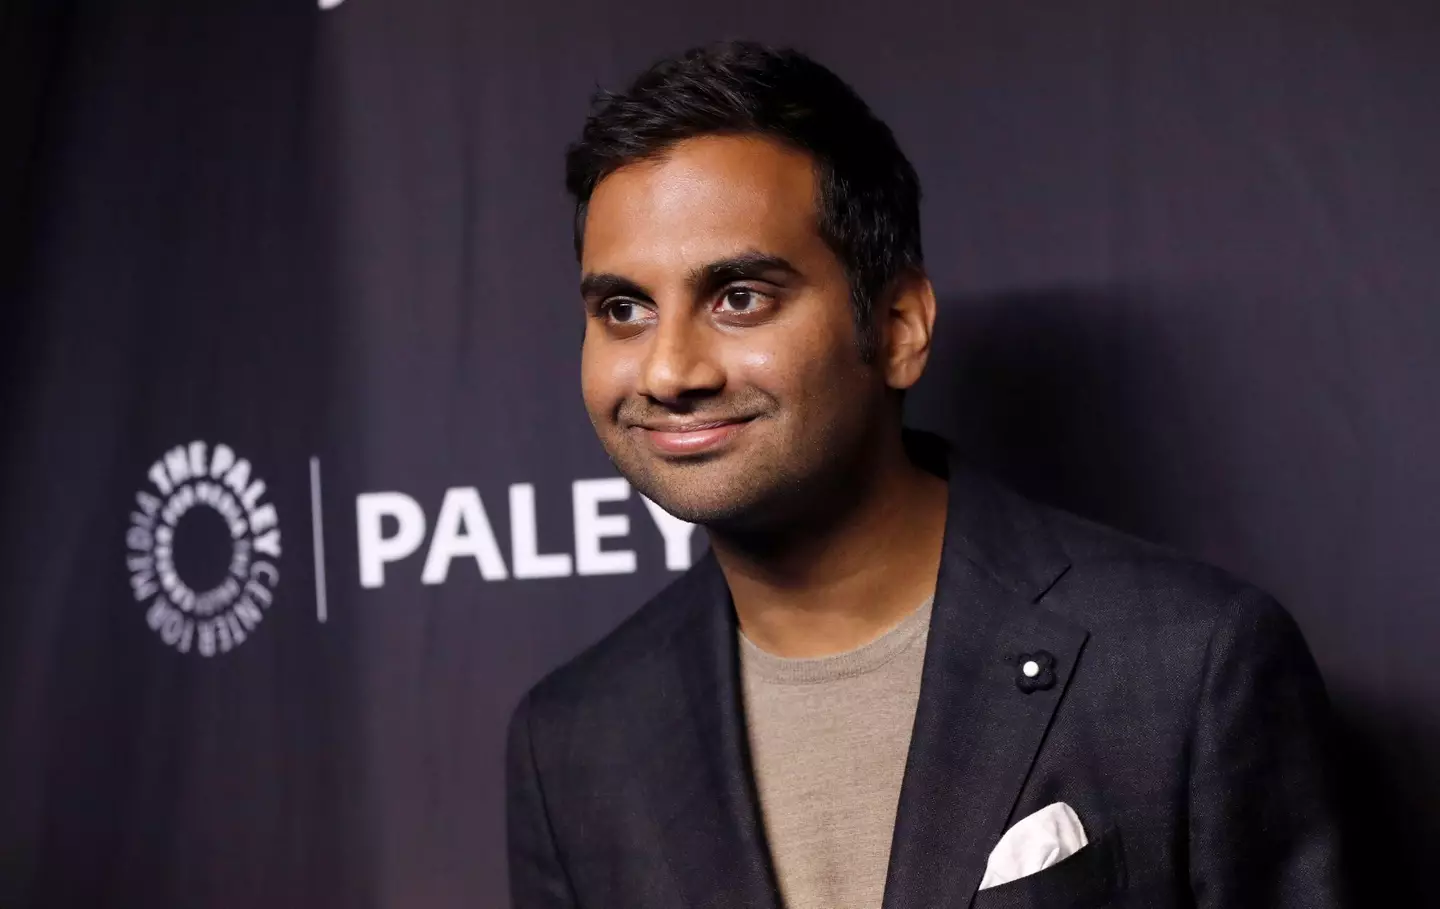 Aziz Ansari is starring, writing, producing and directing the film.